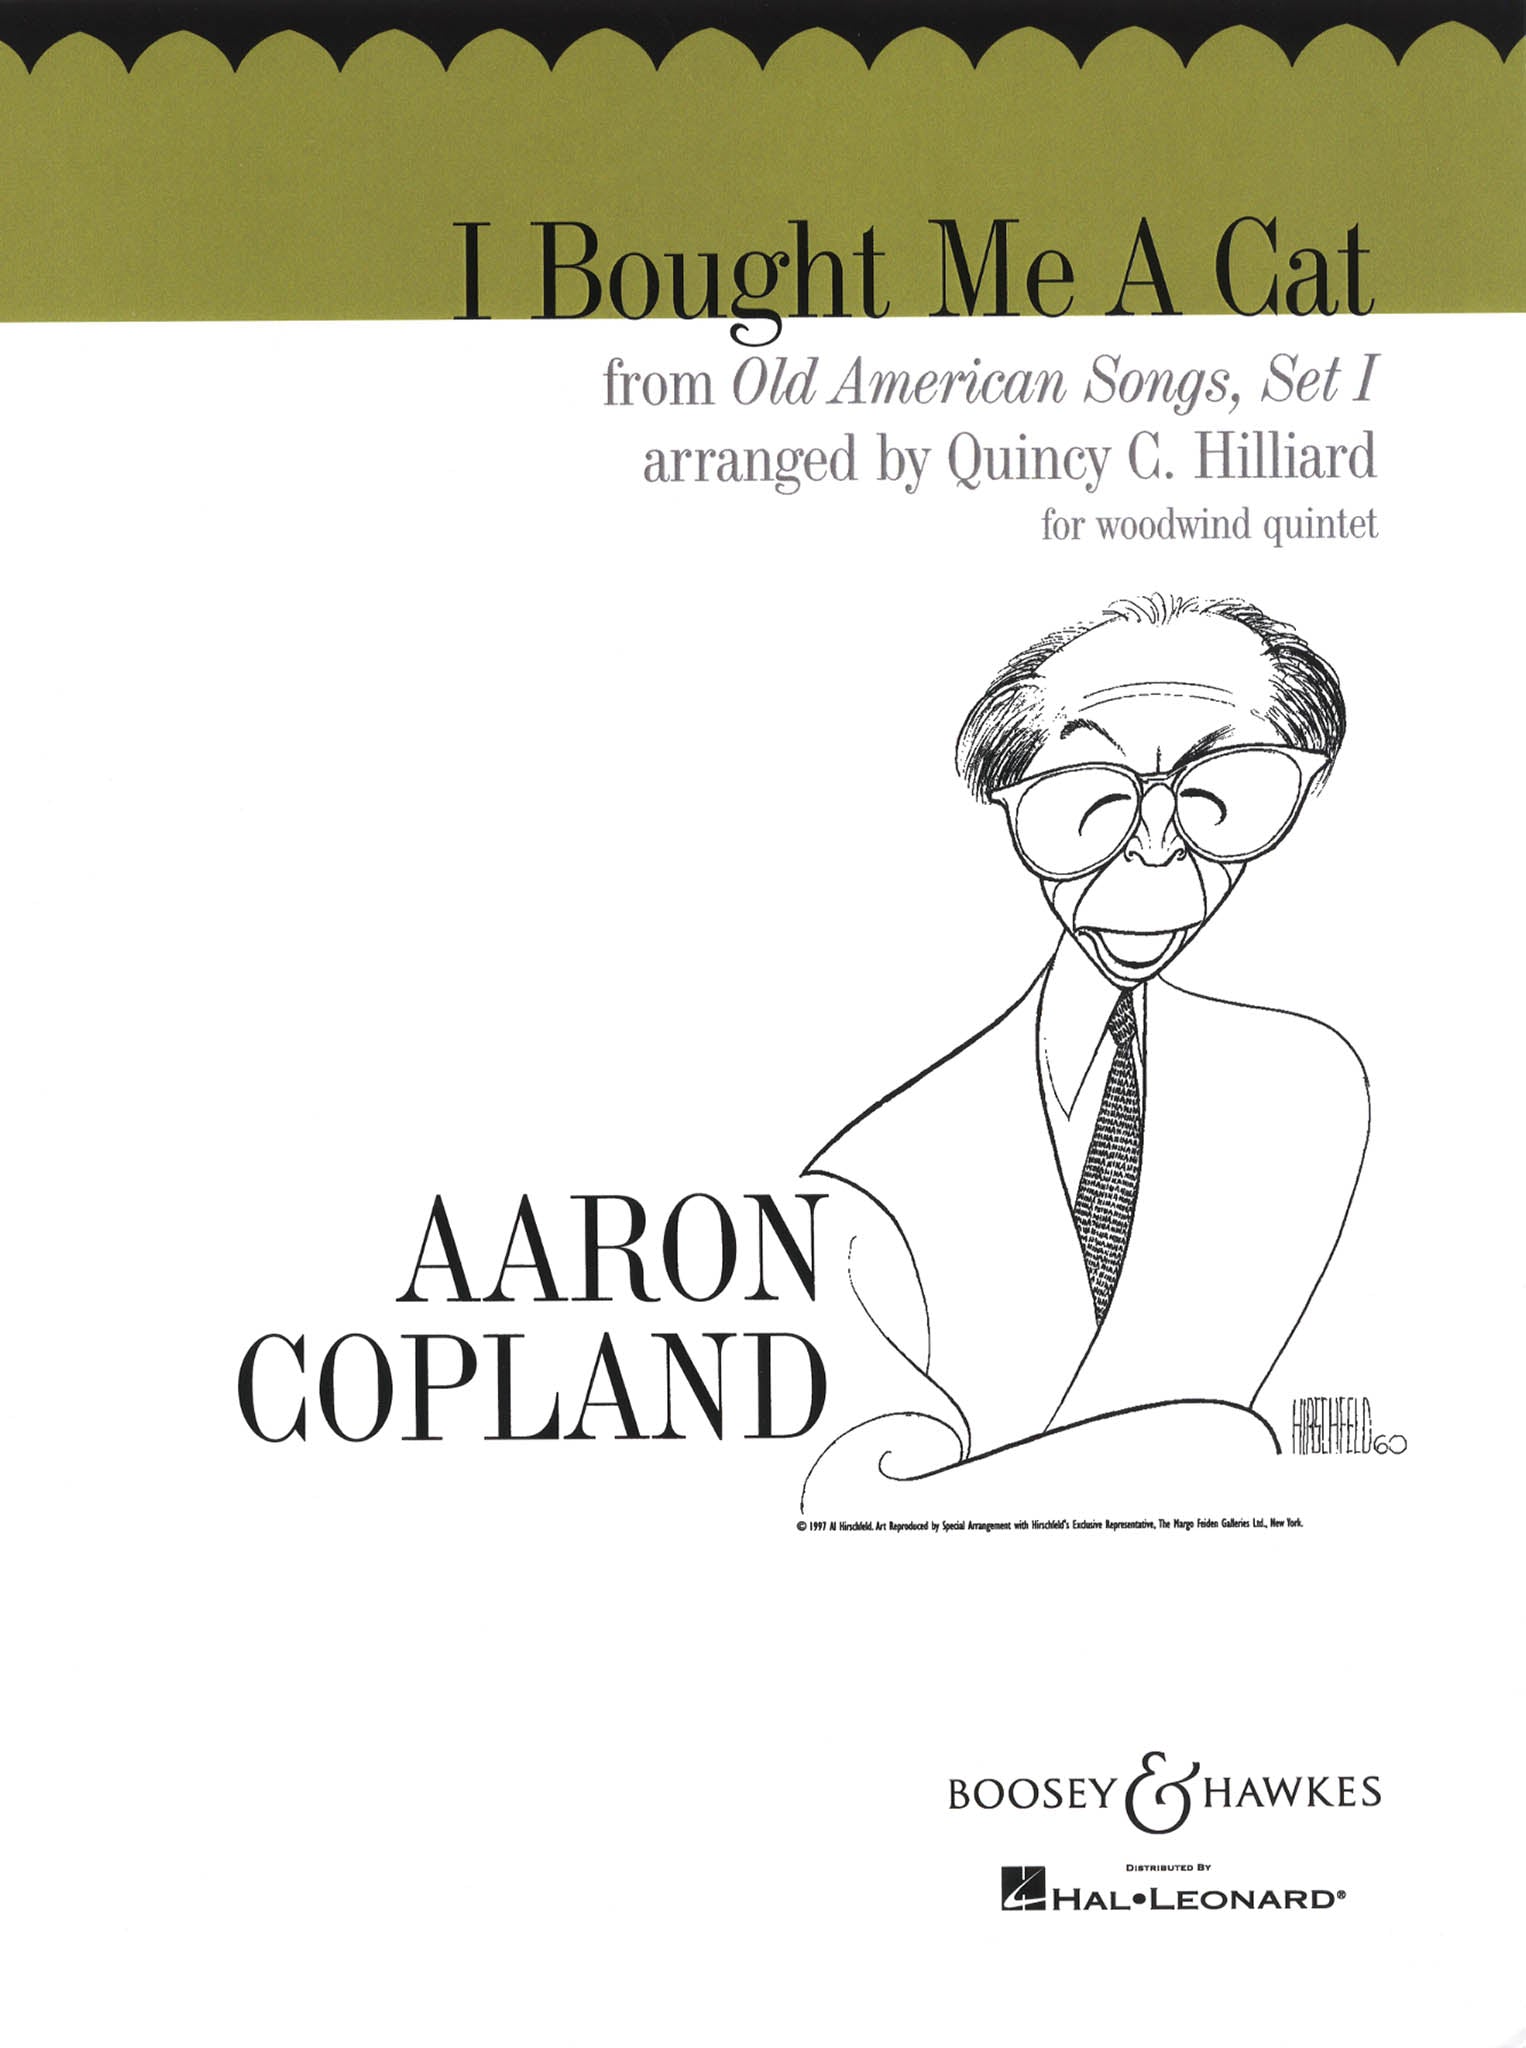 Copland I Bought Me A Cat, from Old American Songs, Set I wind quintet arrangement cover